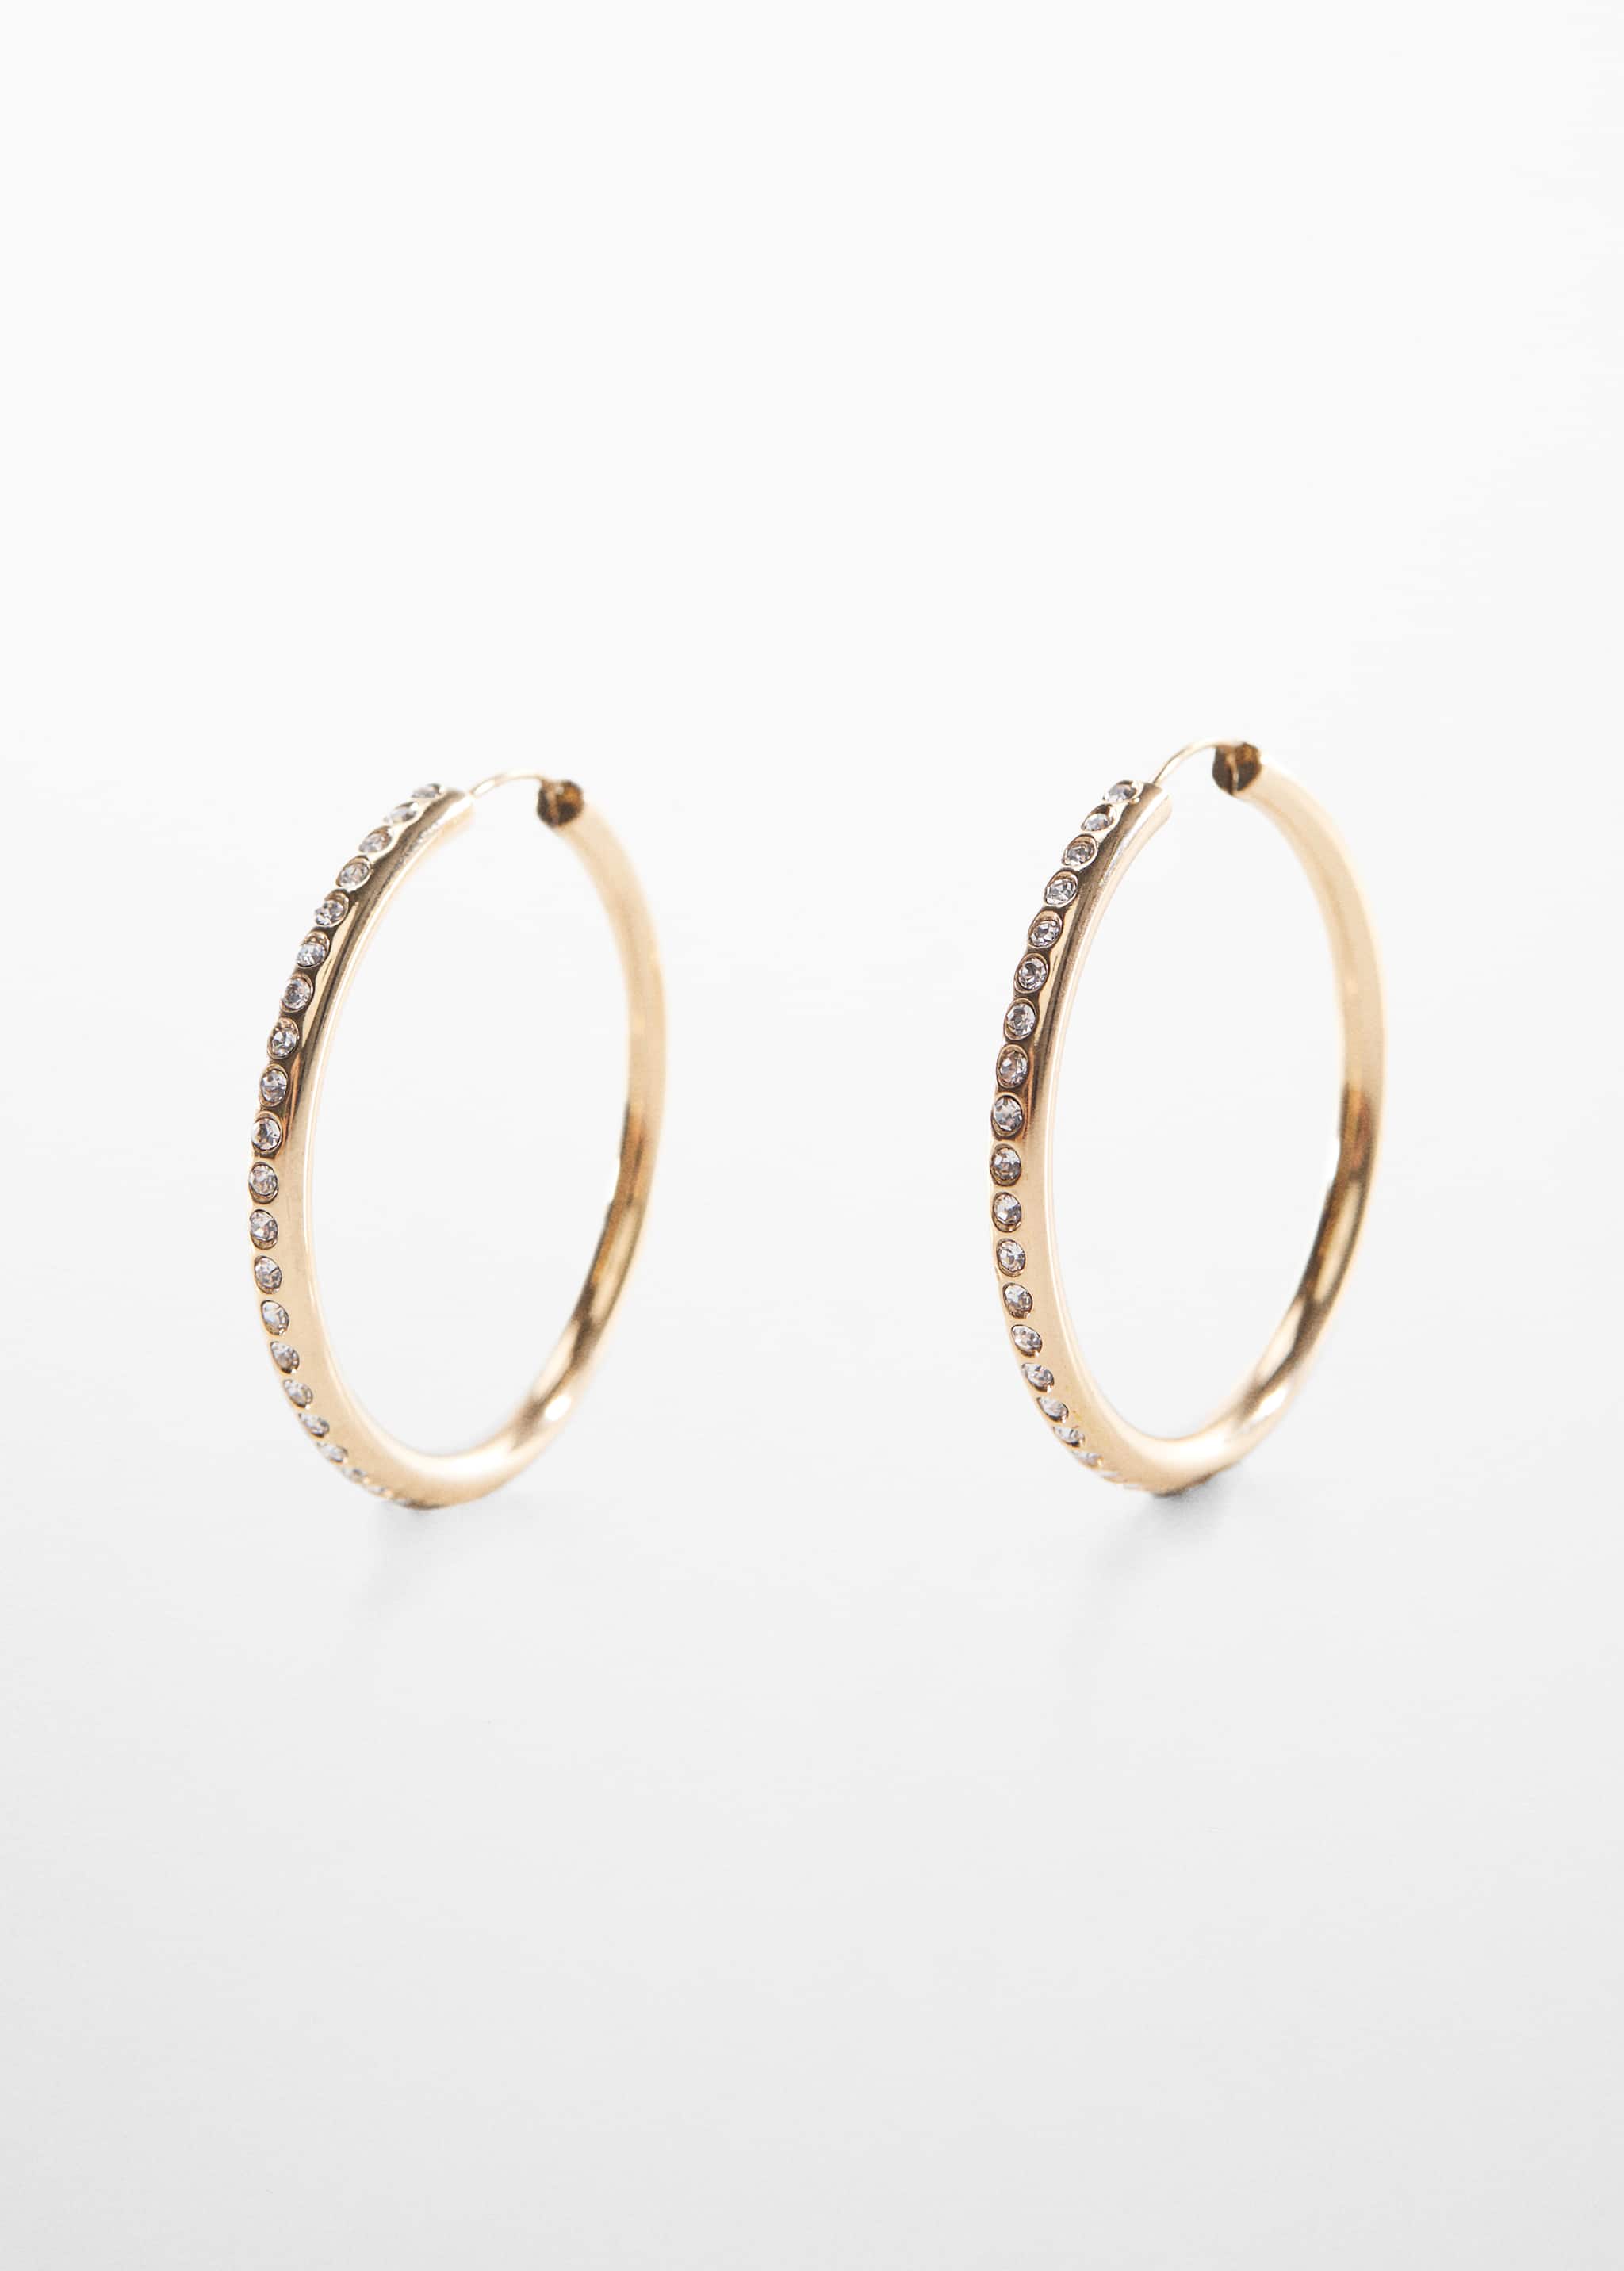 Faceted crystal hoop earrings - Article without model